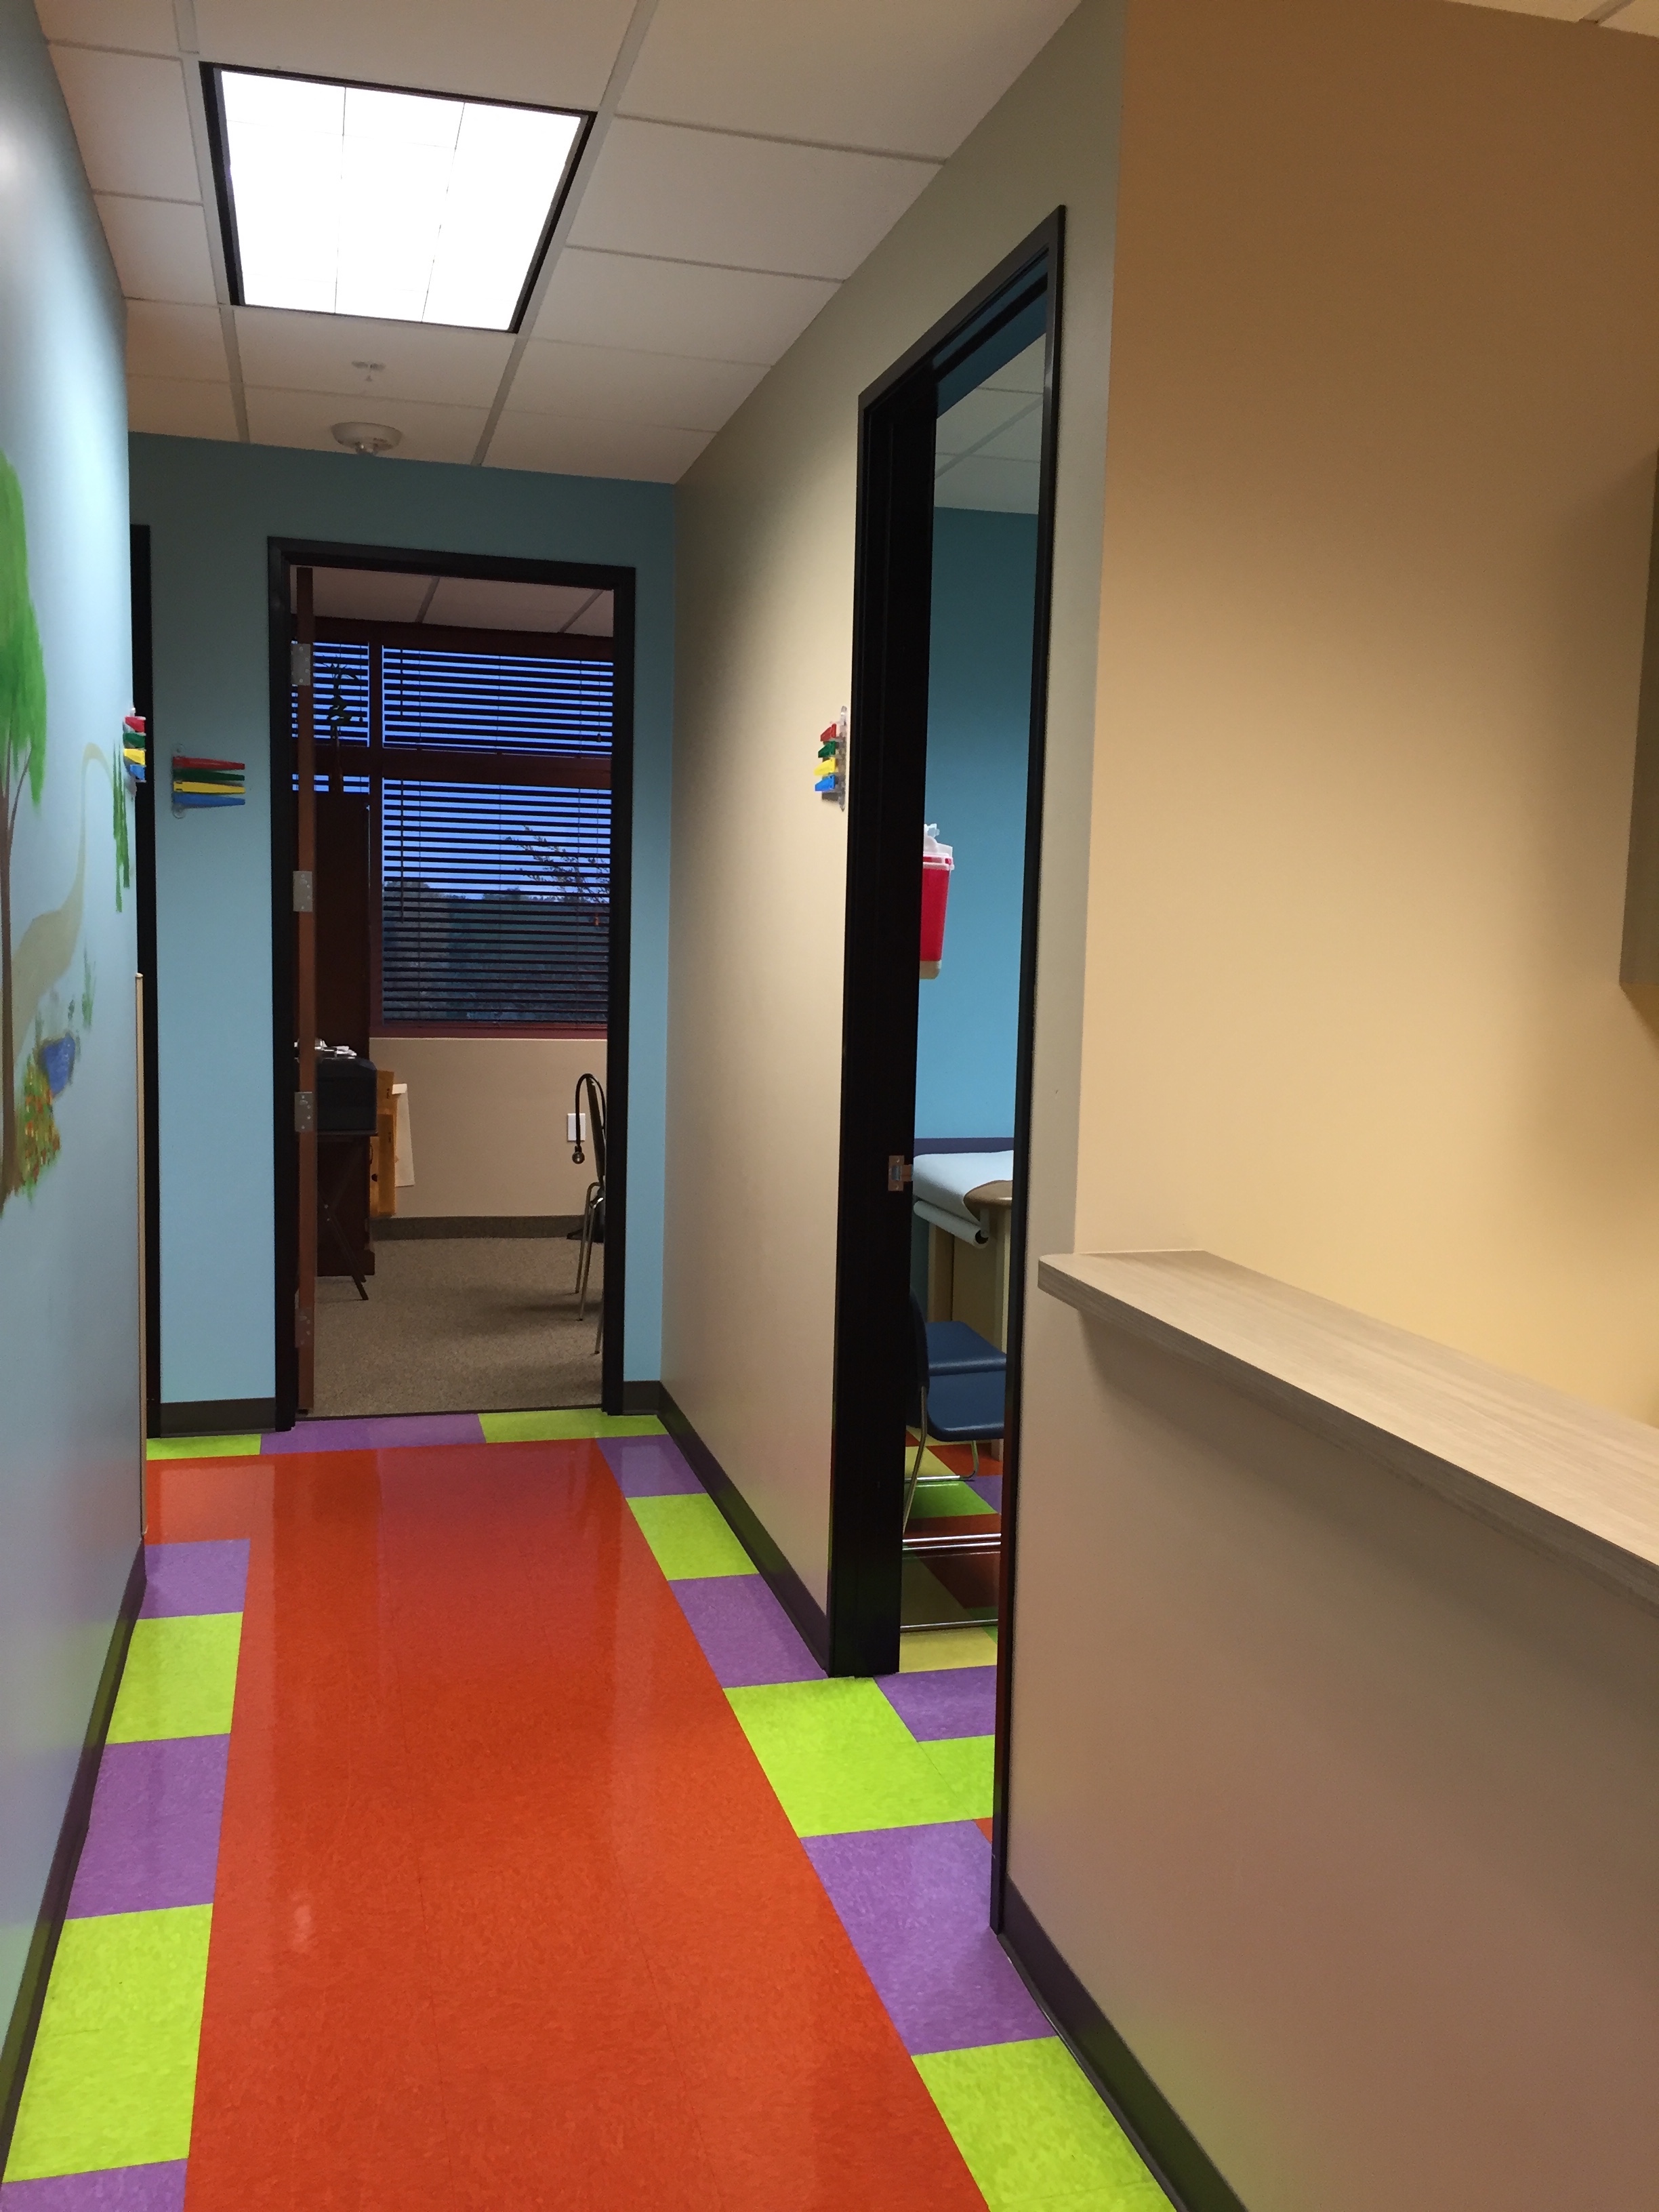 An image of the Bright Horizons Pediatrics hallway with colorful flooring pattern.